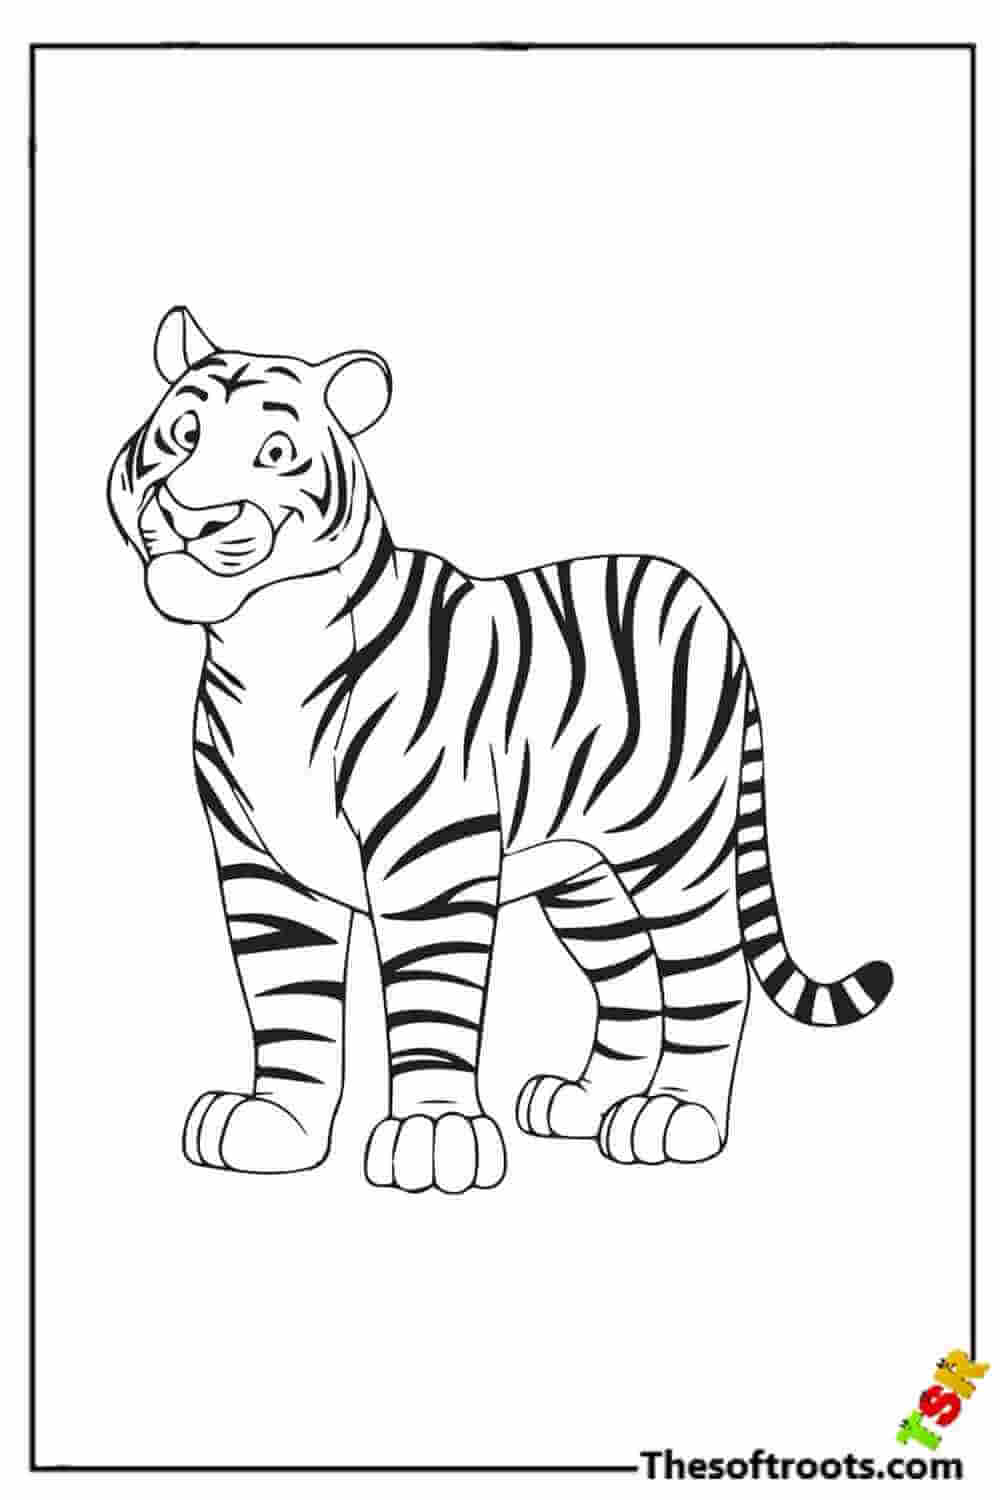 Drawing and Coloring Pages Printables Cute Cartoon Tiger. Crafts and  Worksheets for Kid Stock Vector - Illustration of line, coloring: 211202203